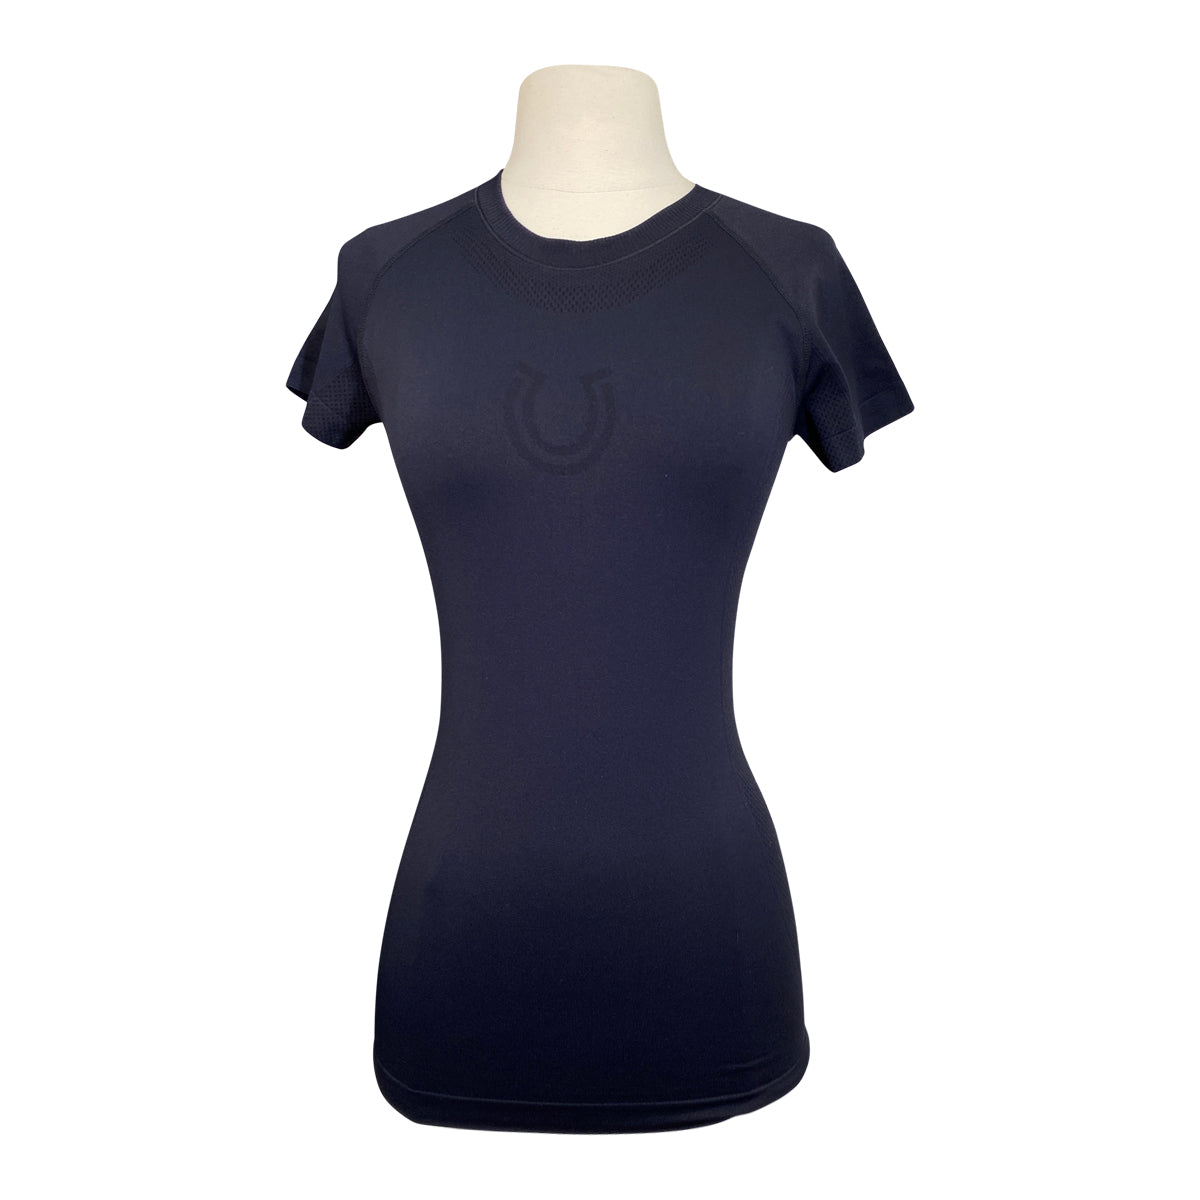 Front FitEq Short Sleeve Seamless Schooling Top in Black - Women's XS/S